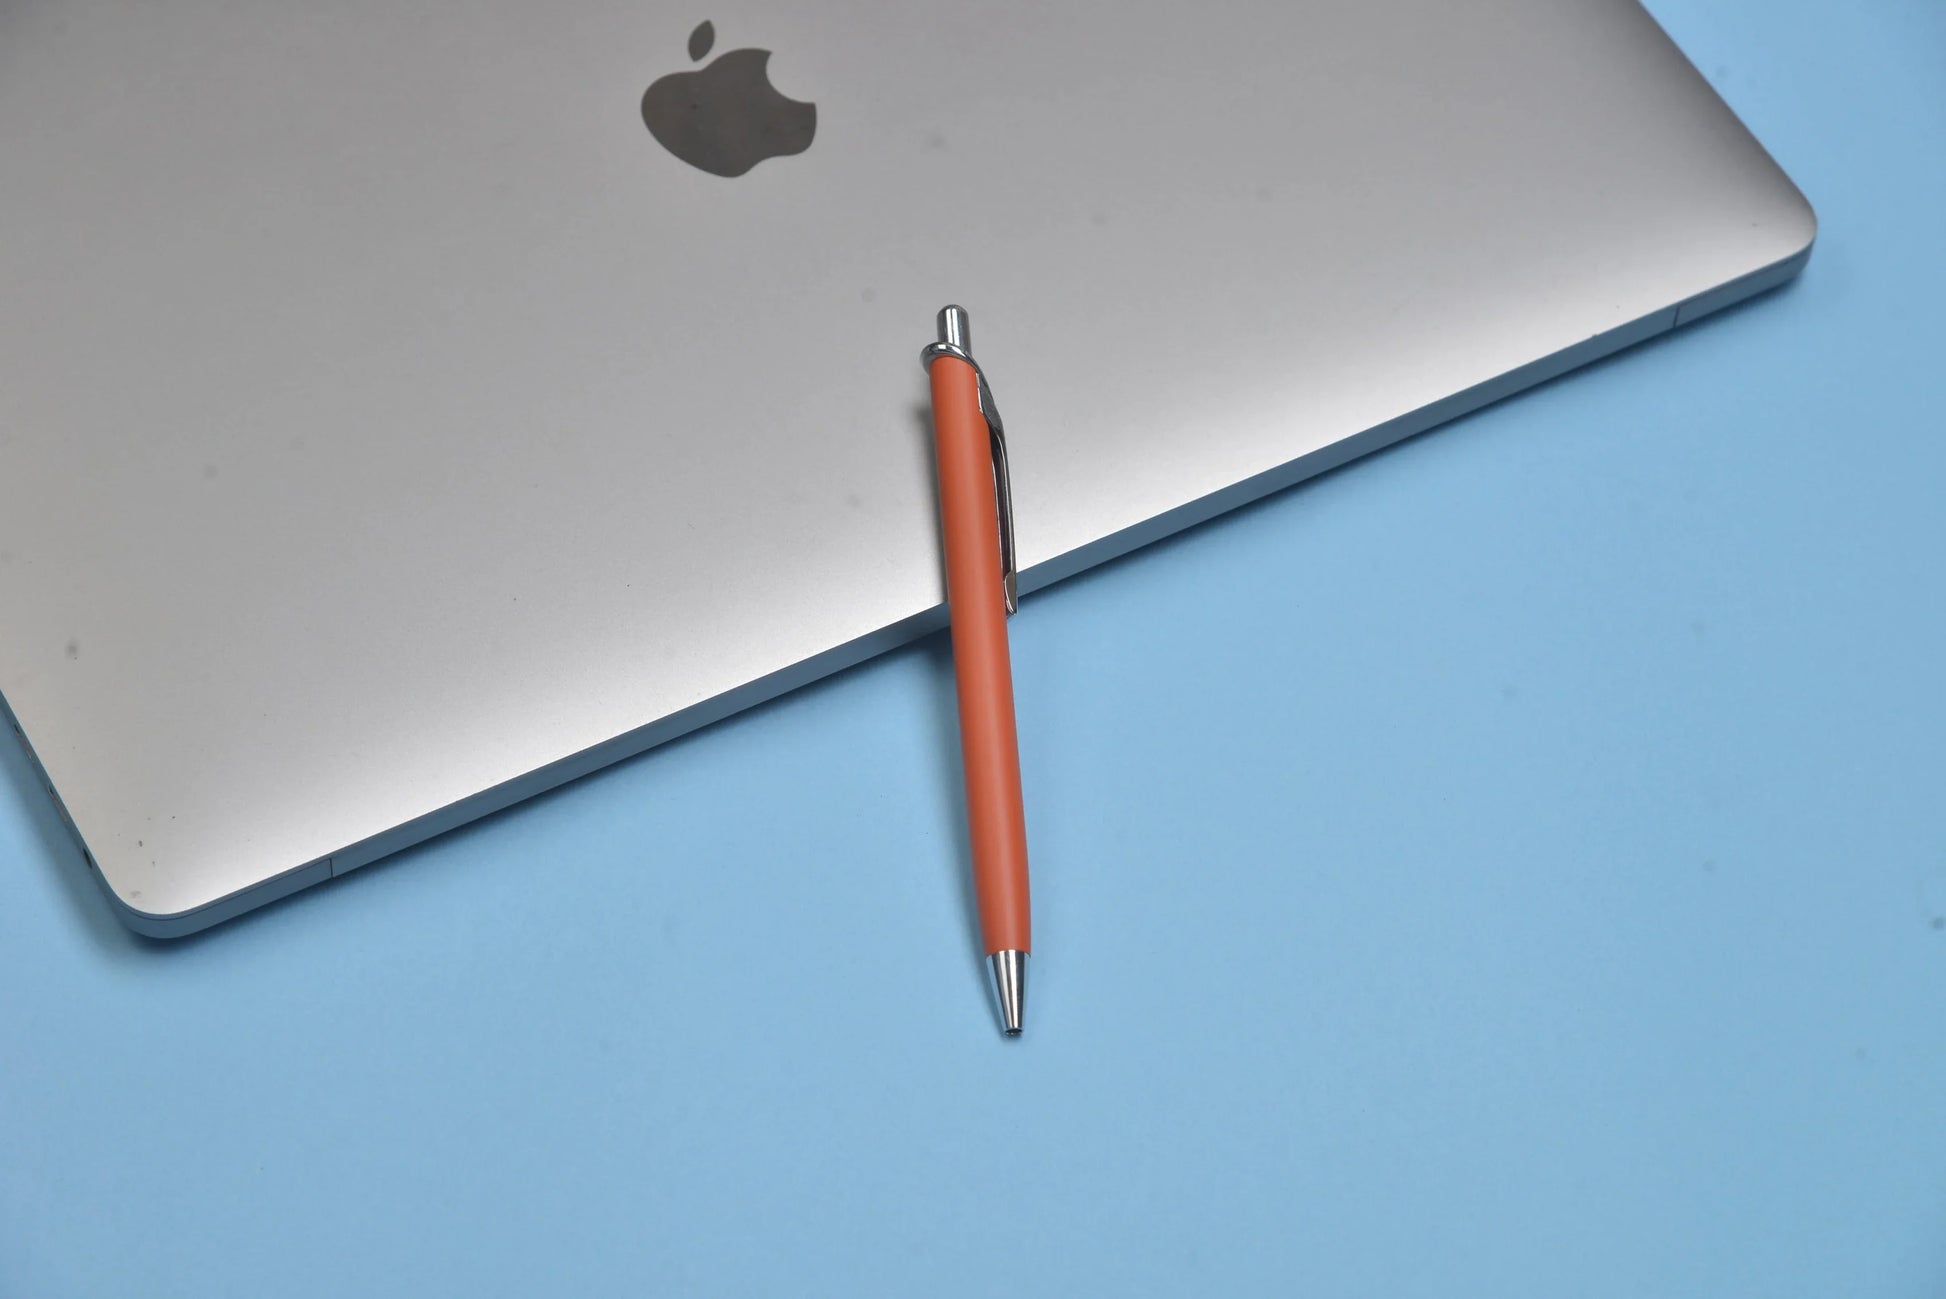 Crafted from high-quality materials, our pen is designed to last. The smooth, refillable ballpoint and comfortable grip make it a pleasure to write with, while the classic design makes it a timeless addition to your desk.